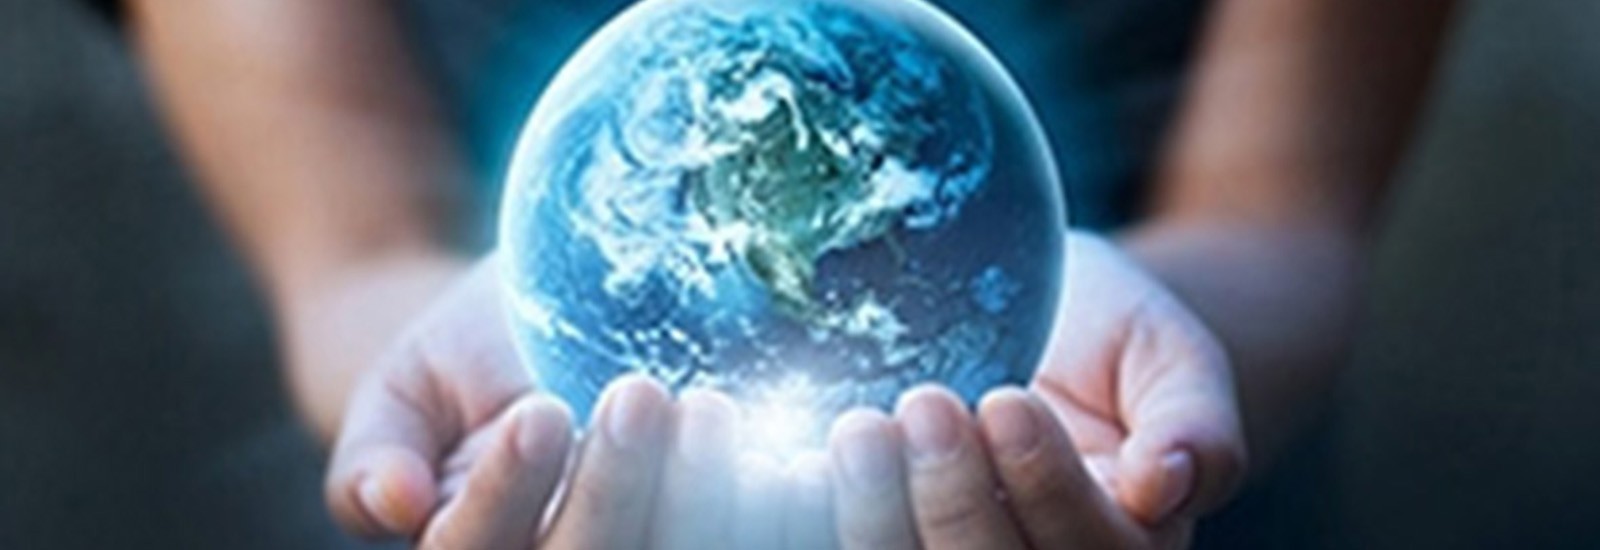 Blue Earth placed in hands